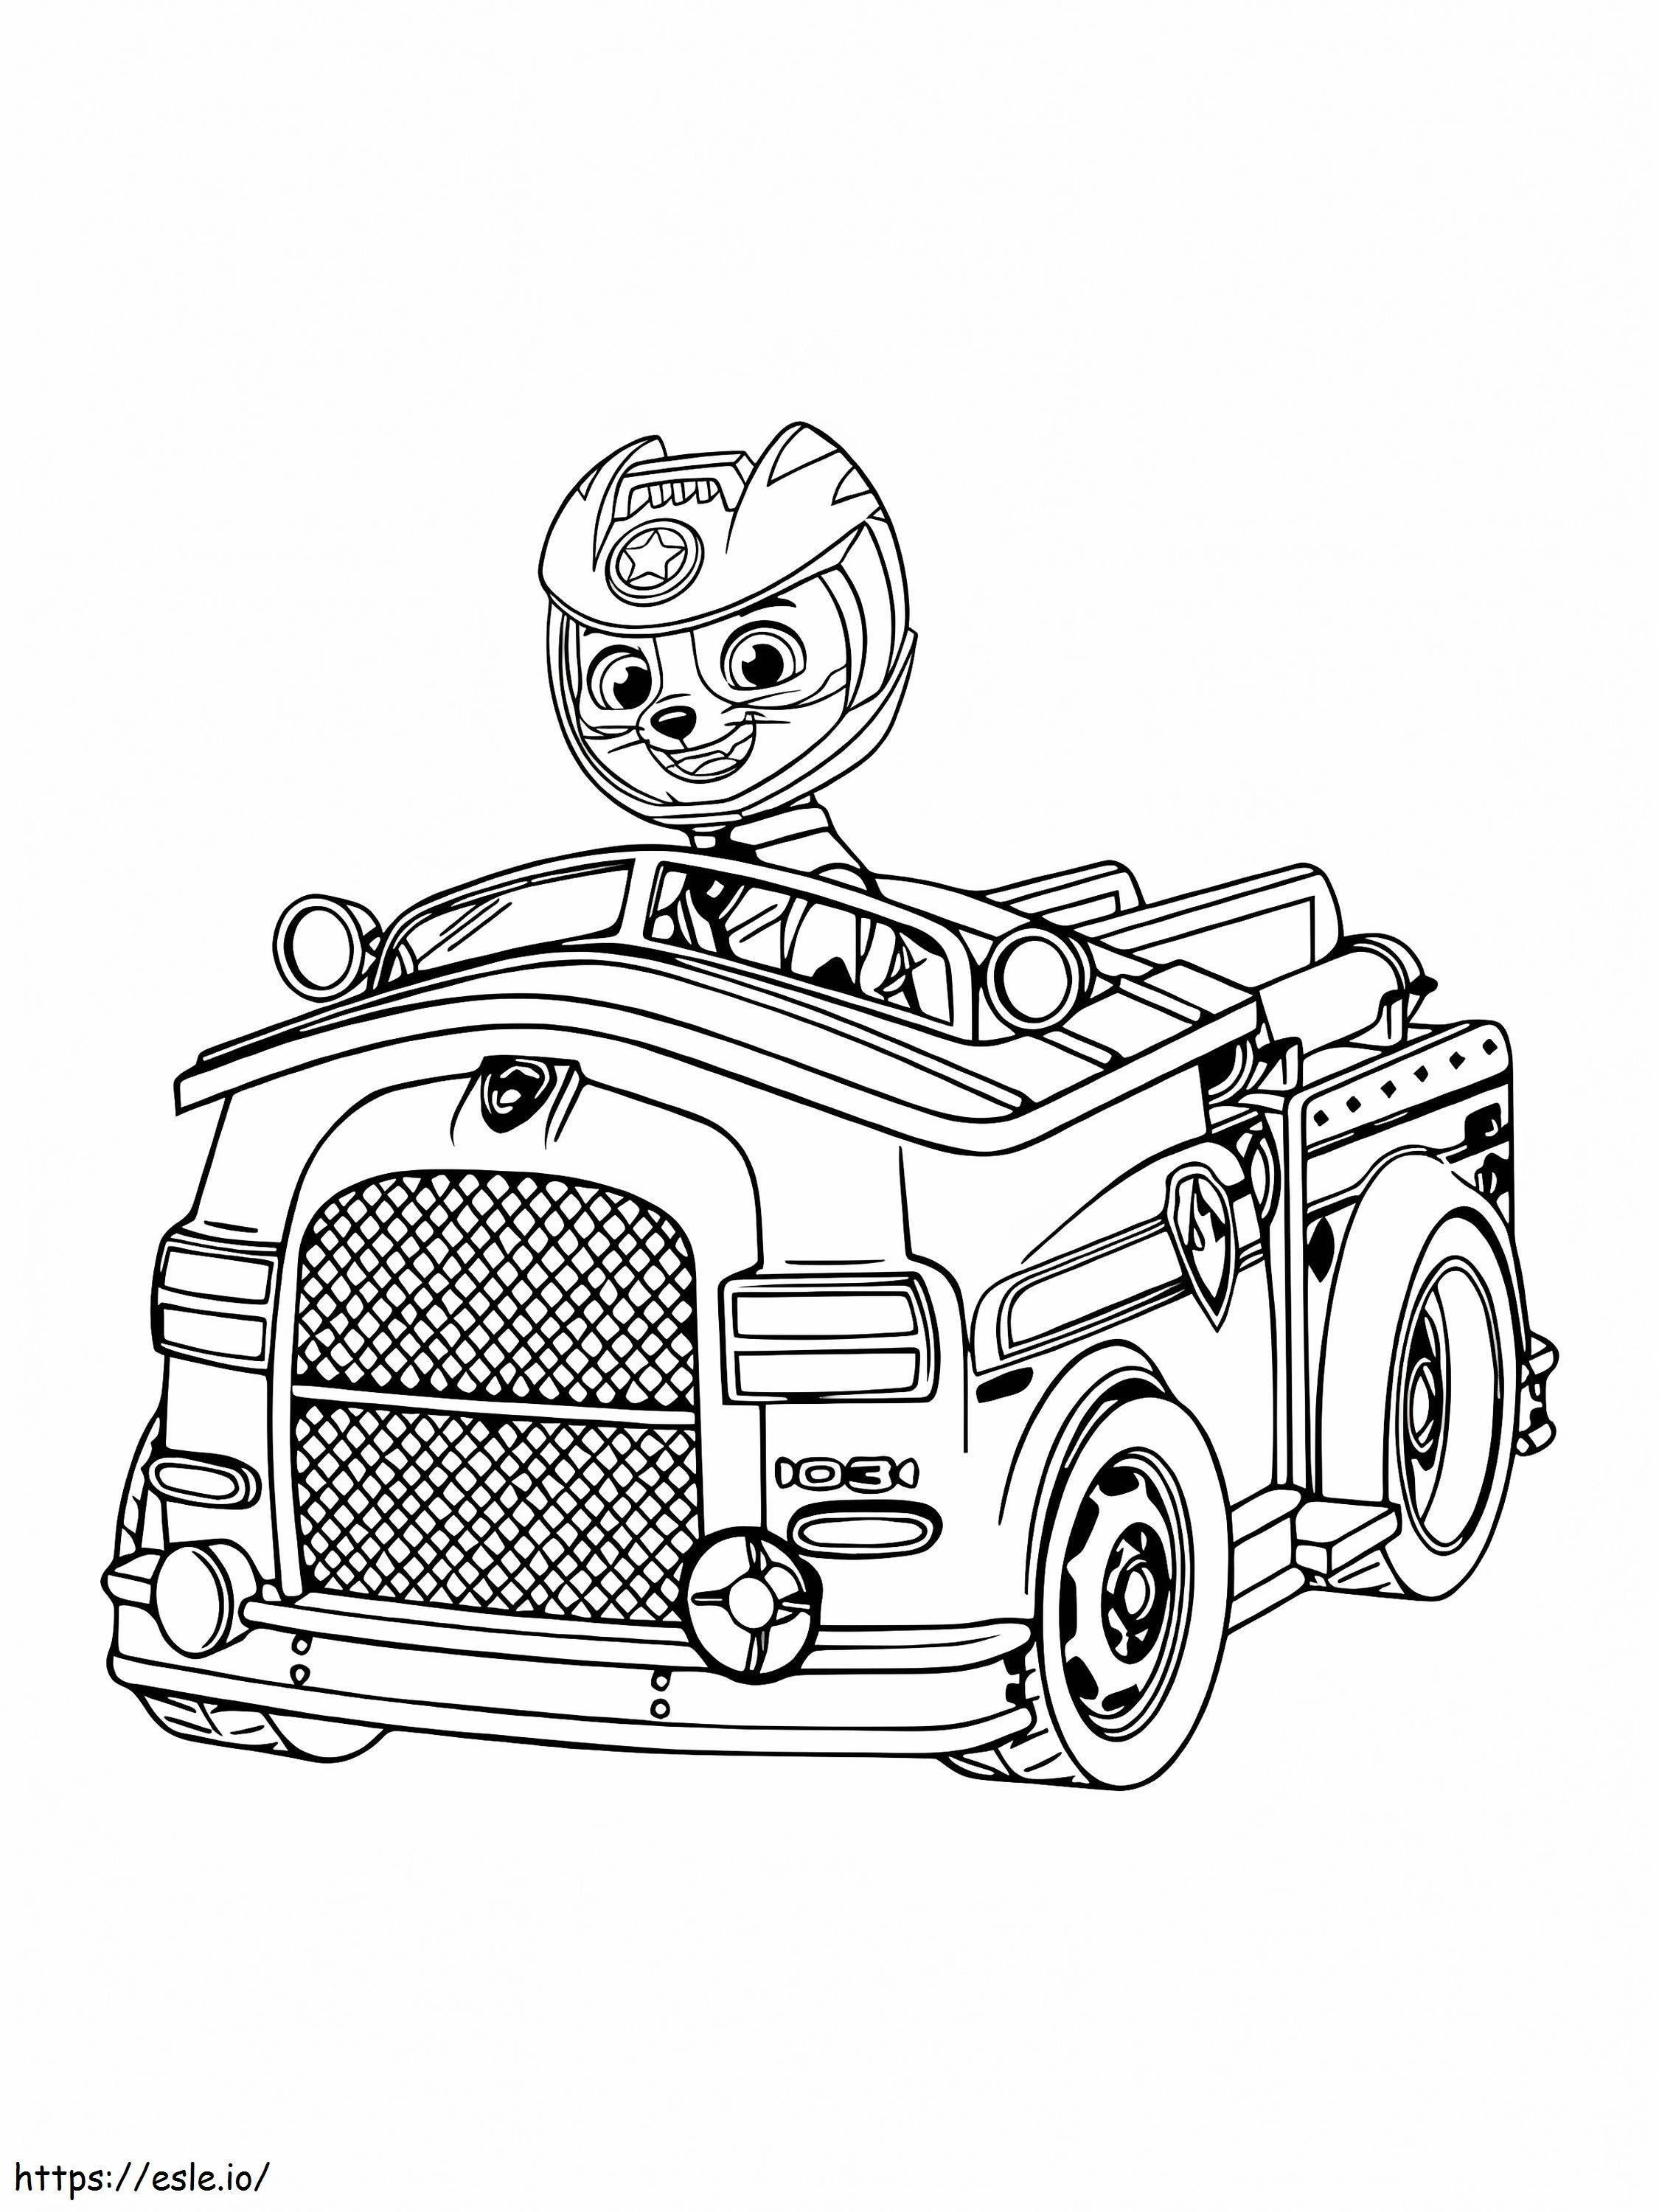 Cute Wild Cat With Car coloring page